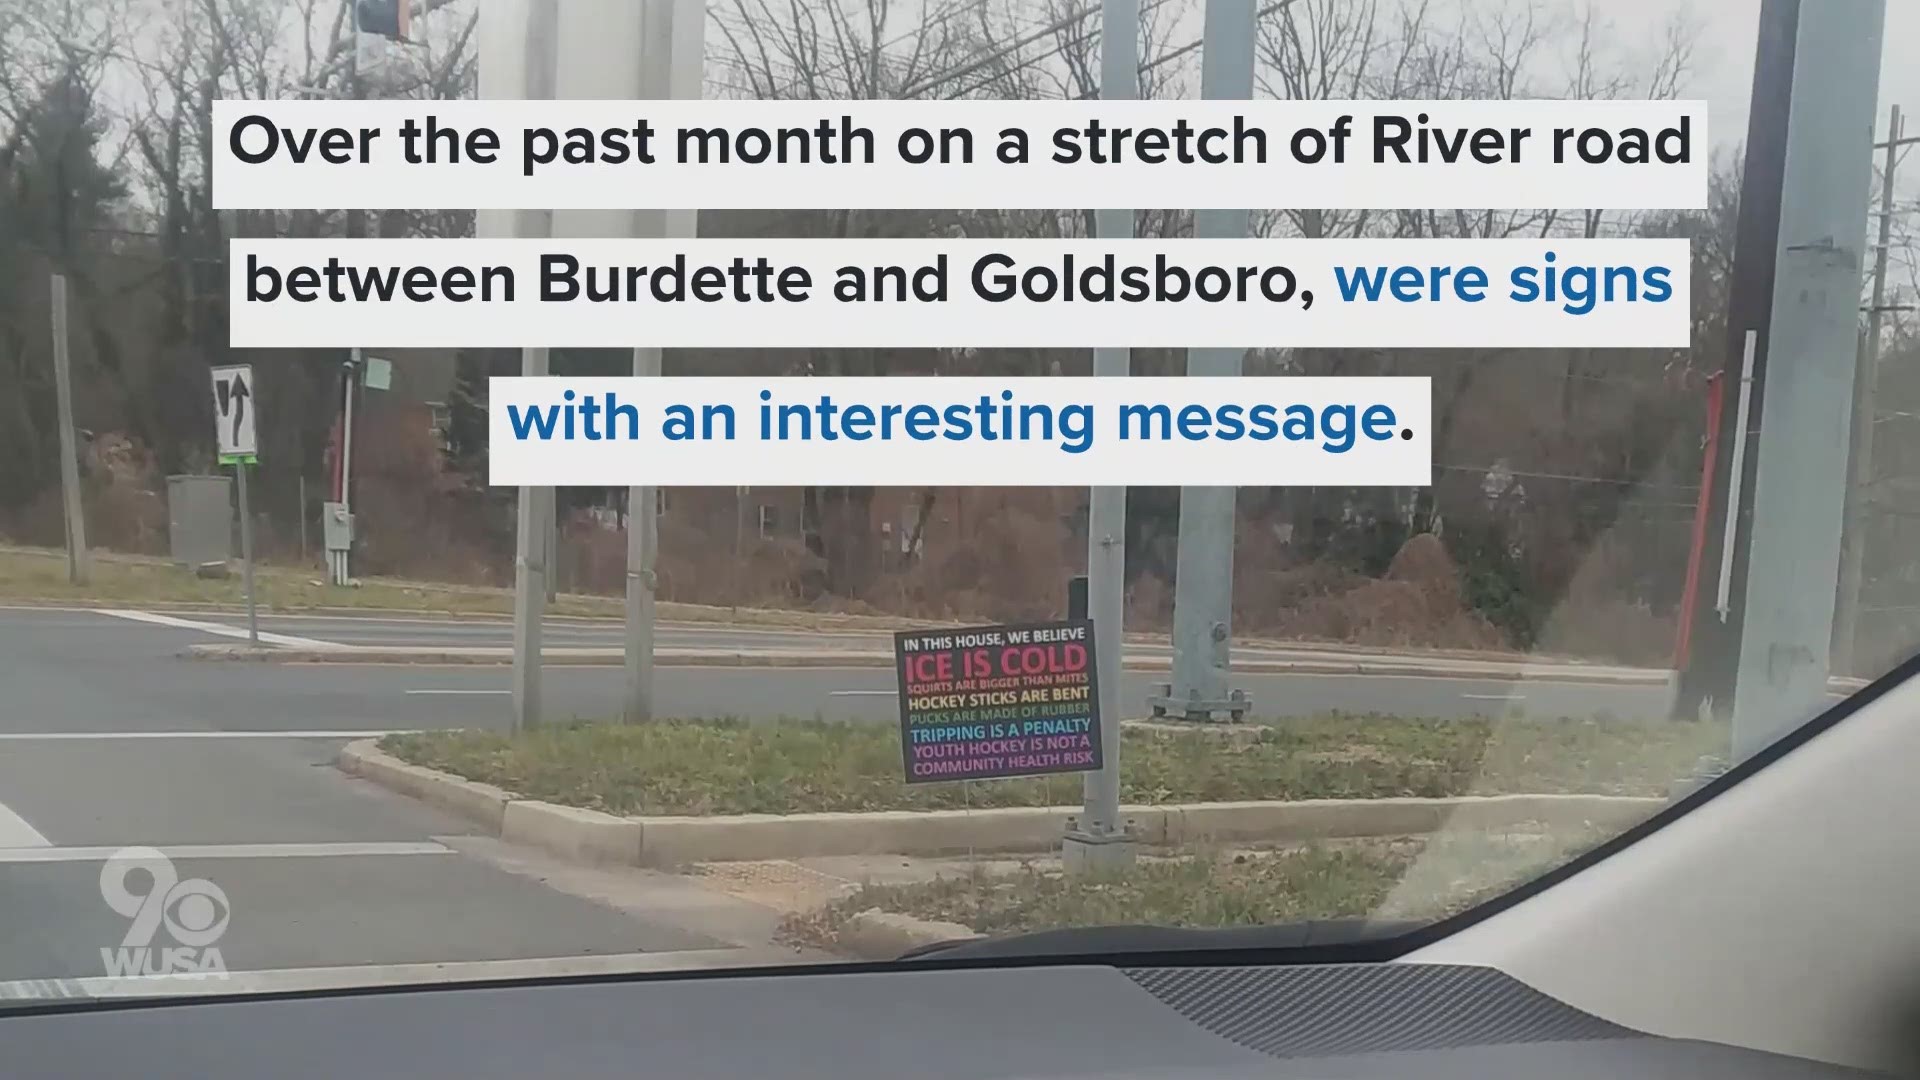 If you had driven down the stretch of River road over the past month, you would have seen some signs with an interesting message